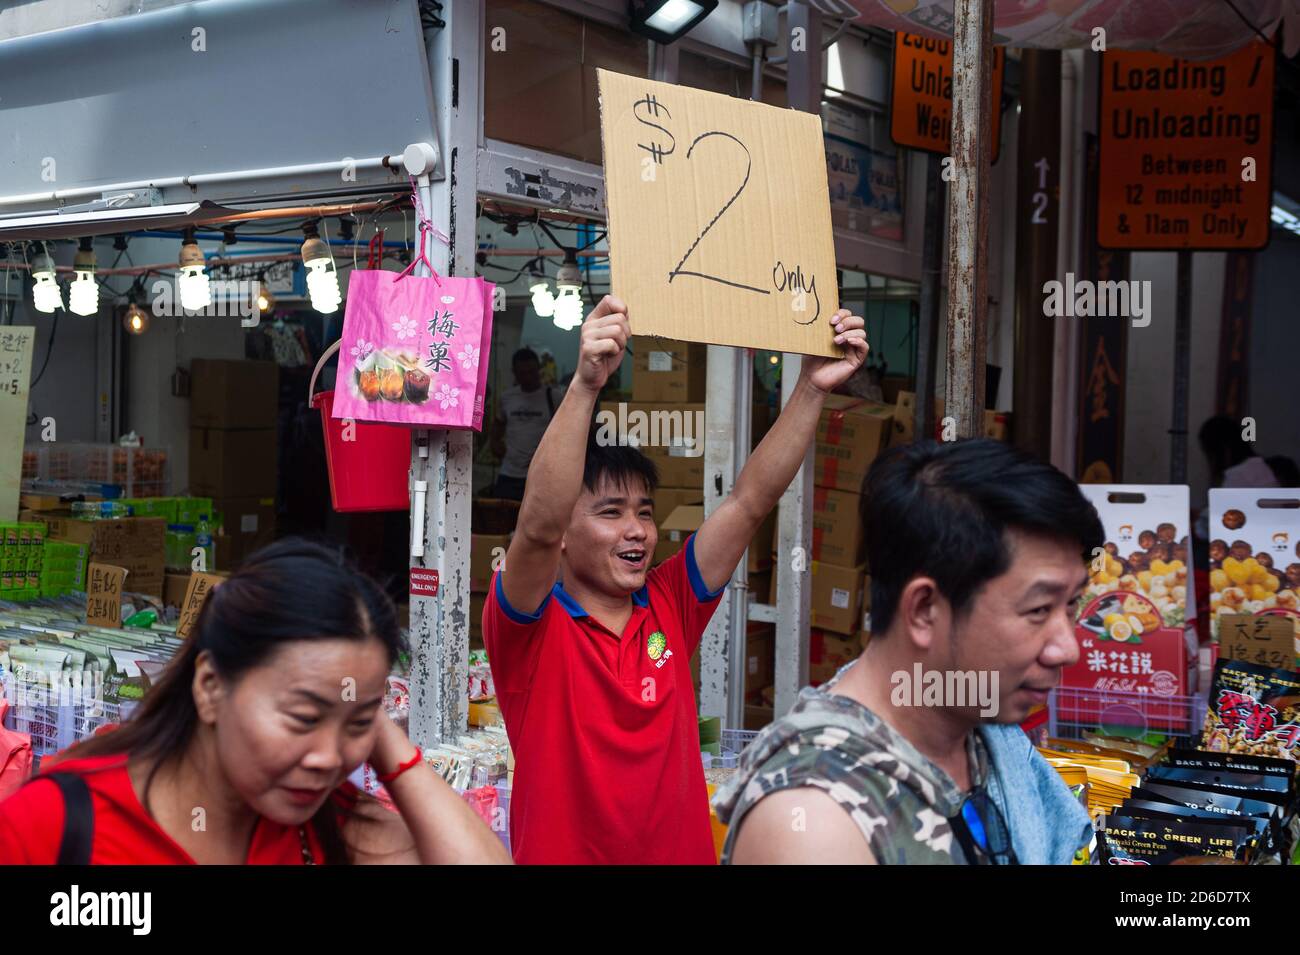 24.01.2020, Singapore, , Singapore - A salesman holds up a cardboard sign with a savings offer at the beginning of the Corona crisis, while people str Stock Photo